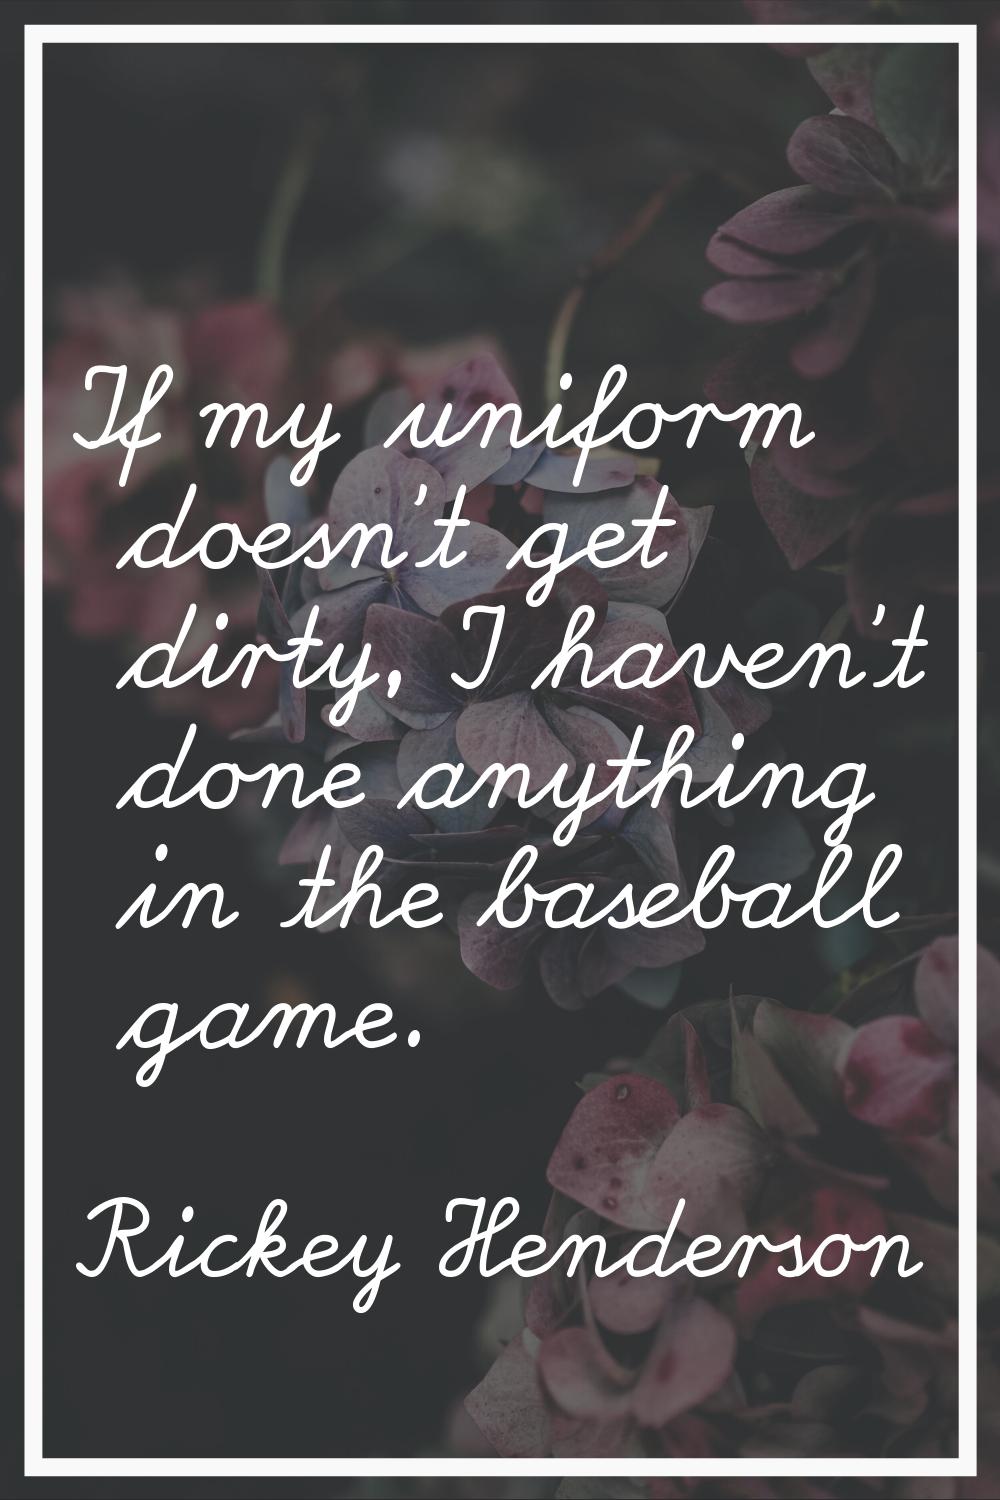 If my uniform doesn't get dirty, I haven't done anything in the baseball game.